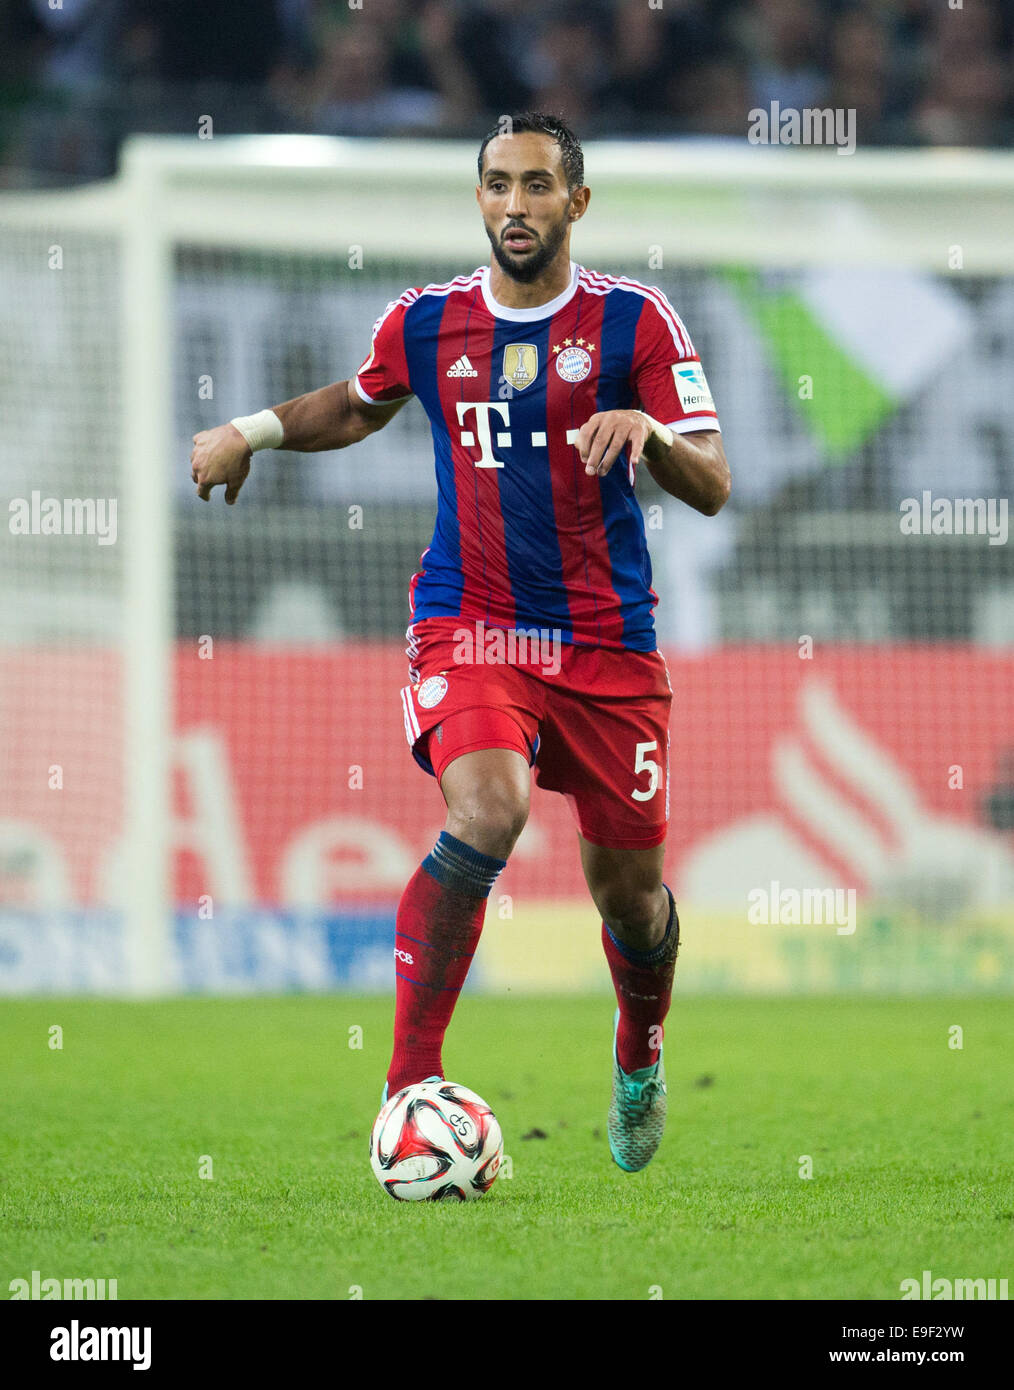 Moenchengladbach, Germany. 26th Oct, 2014. Bayern's Medhi Benatia with the ball during the German Bundesliga match between Borussia Moenchengladbach and FC Bayern Munich in Borussia Park in Moenchengladbach, Germany, 26 October 2014. Credit:  dpa picture alliance/Alamy Live News Stock Photo